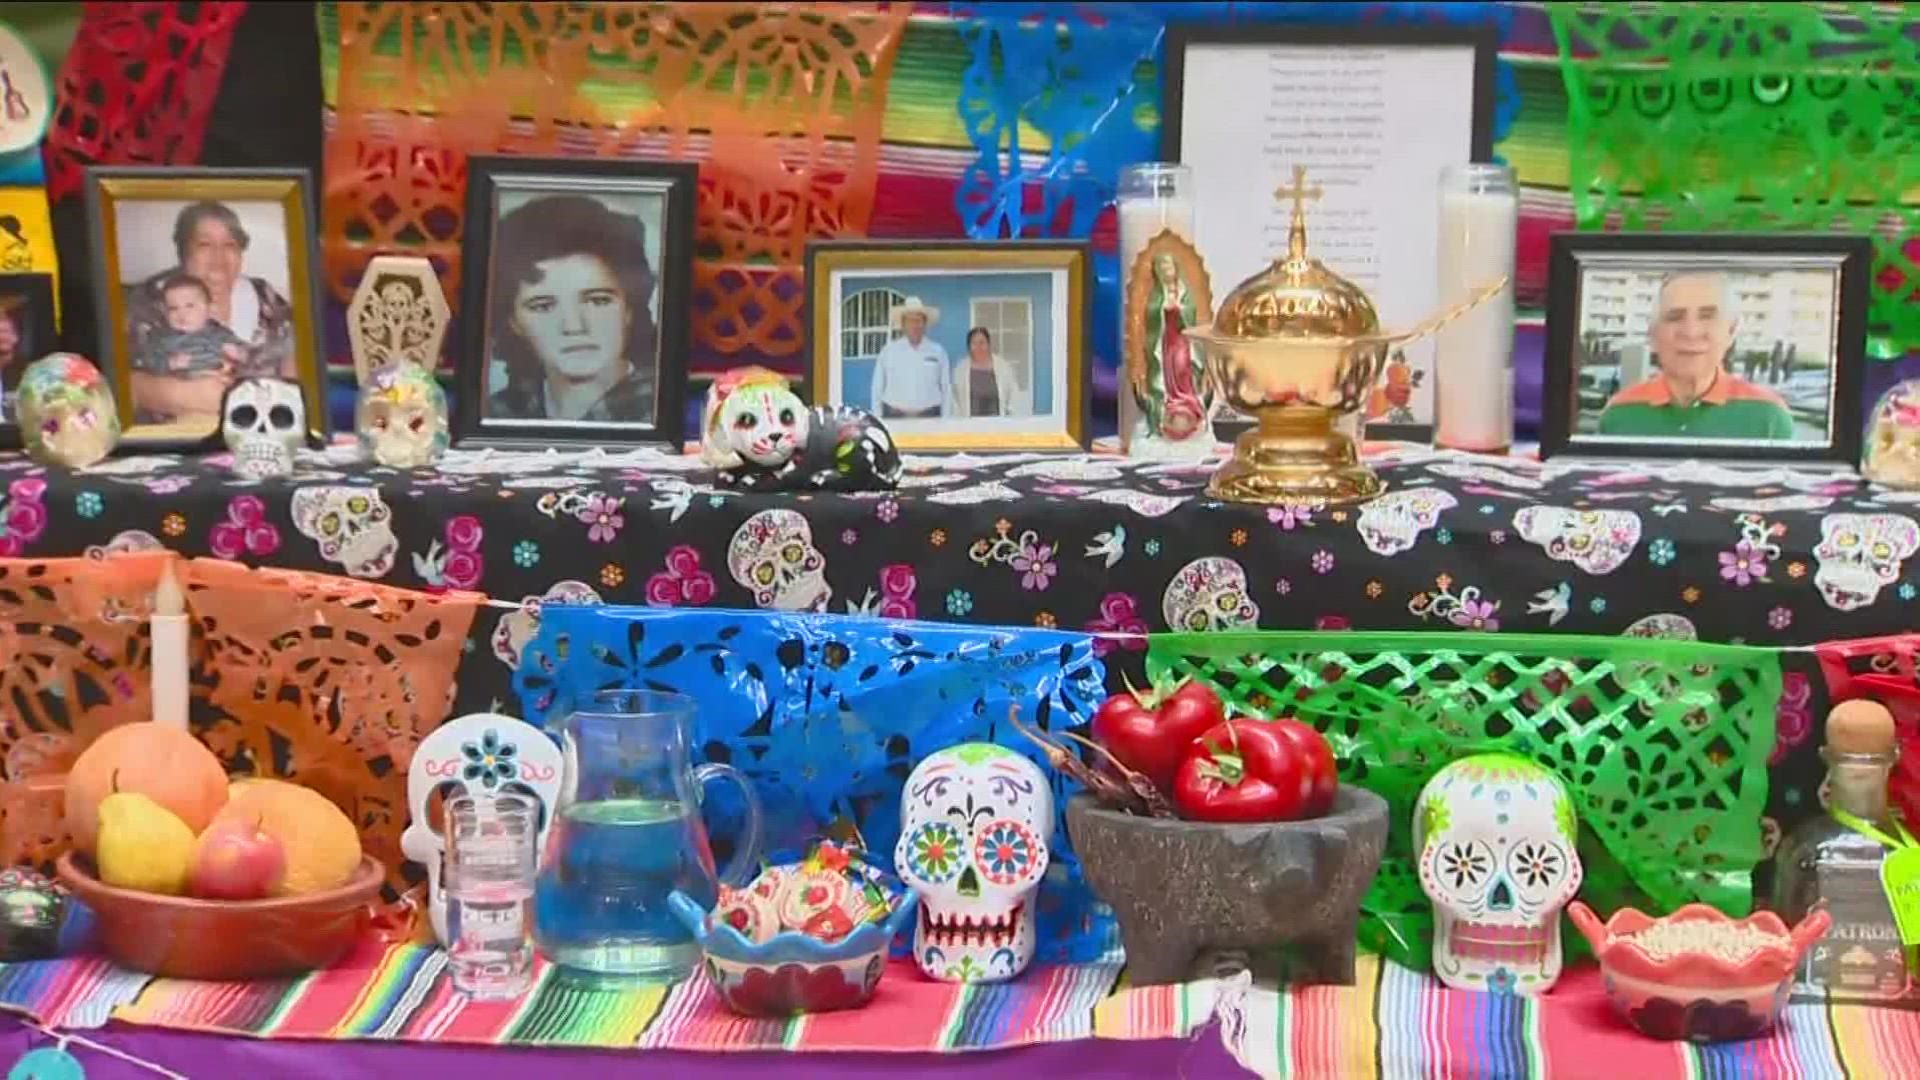 The two-day celebration, part of a centuries-old tradition, honors loved ones who have passed away. An event at JUMP in Boise wraps up Wednesday.